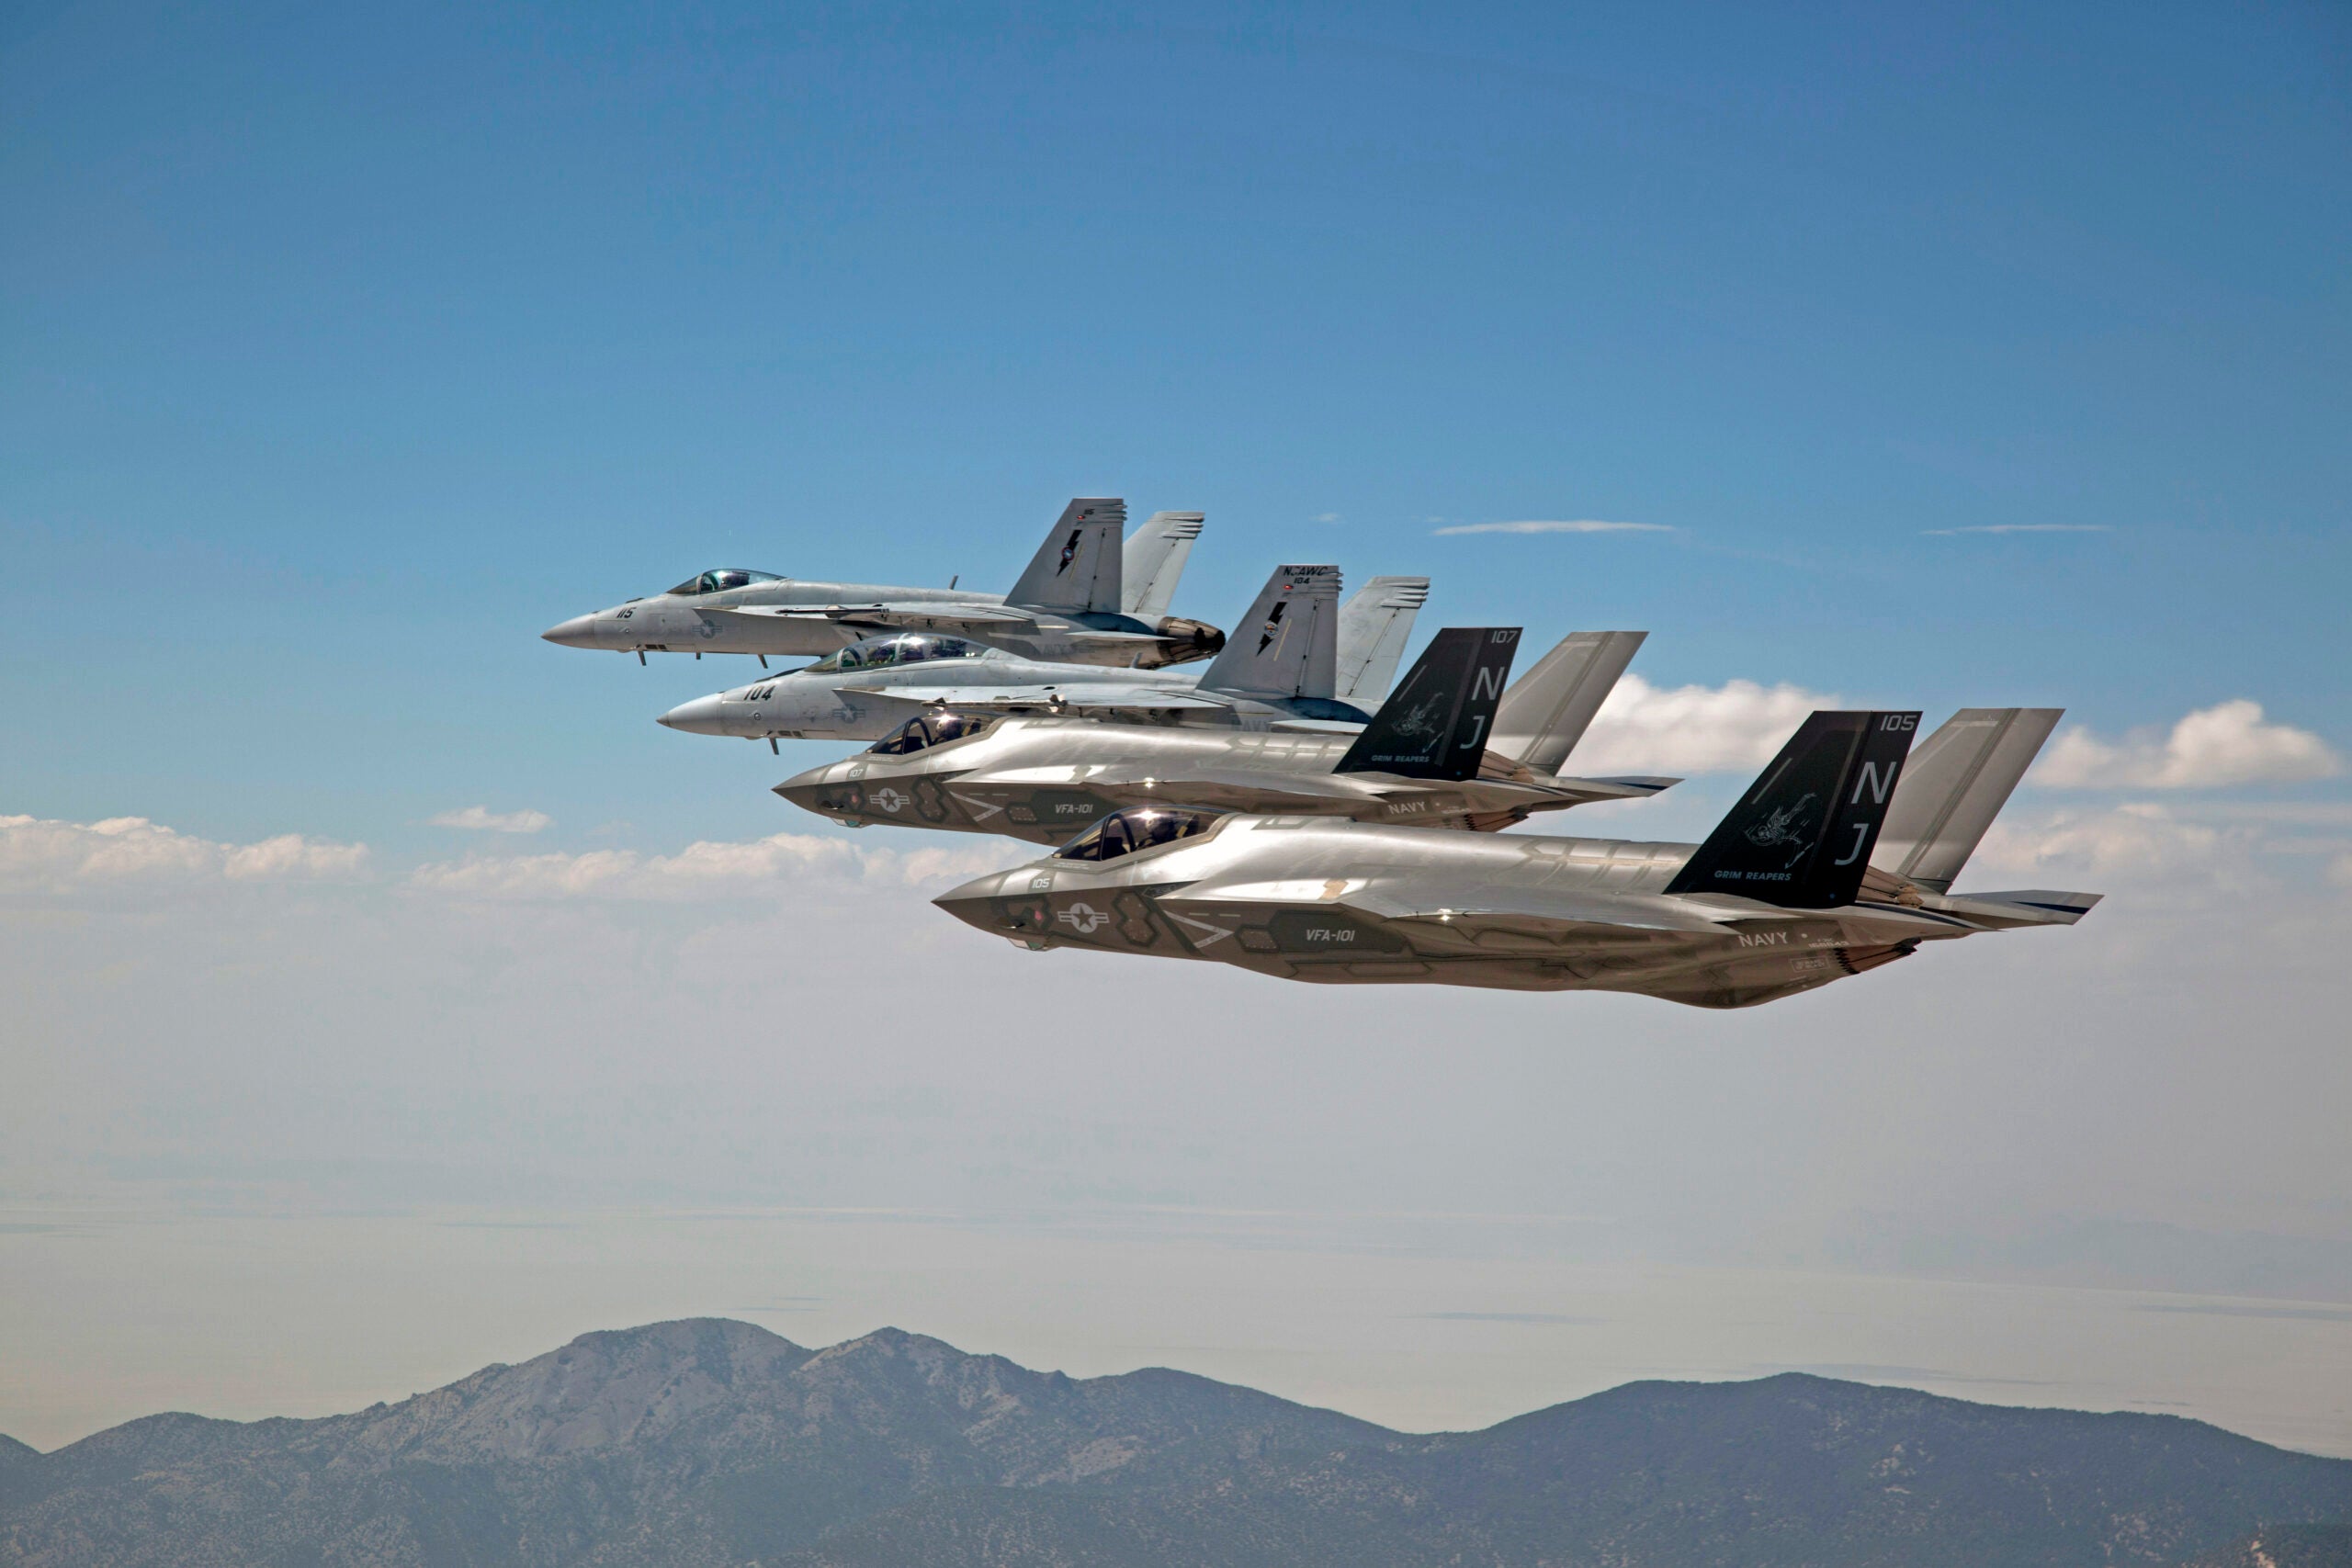 150903-N-SS390-354 
FALLON, Nev. (Sept. 3, 2015) F-35C Lightning IIs, assigned to the Grim Reapers of Strike Fighter Squadron (VFA) 101, and an F/A-18E/F Super Hornets assigned to the Naval Aviation Warfighter Development Center (NAWDC) fly over Naval Air Station Fallon's (NASF) Range Training Complex. VFA 101, based out of Eglin Air Force Base, is conducting an F-35C cross-country visit to NASF.  The purpose is to begin integration of F-35C with the Fallon Range Training Complex and work with NAWDC to refine tactics, techniques and procedures (TTP) of F-35C as it integrates into the carrier air wing. (U.S. Navy photo by Lt. Cmdr. Darin Russell/Released)